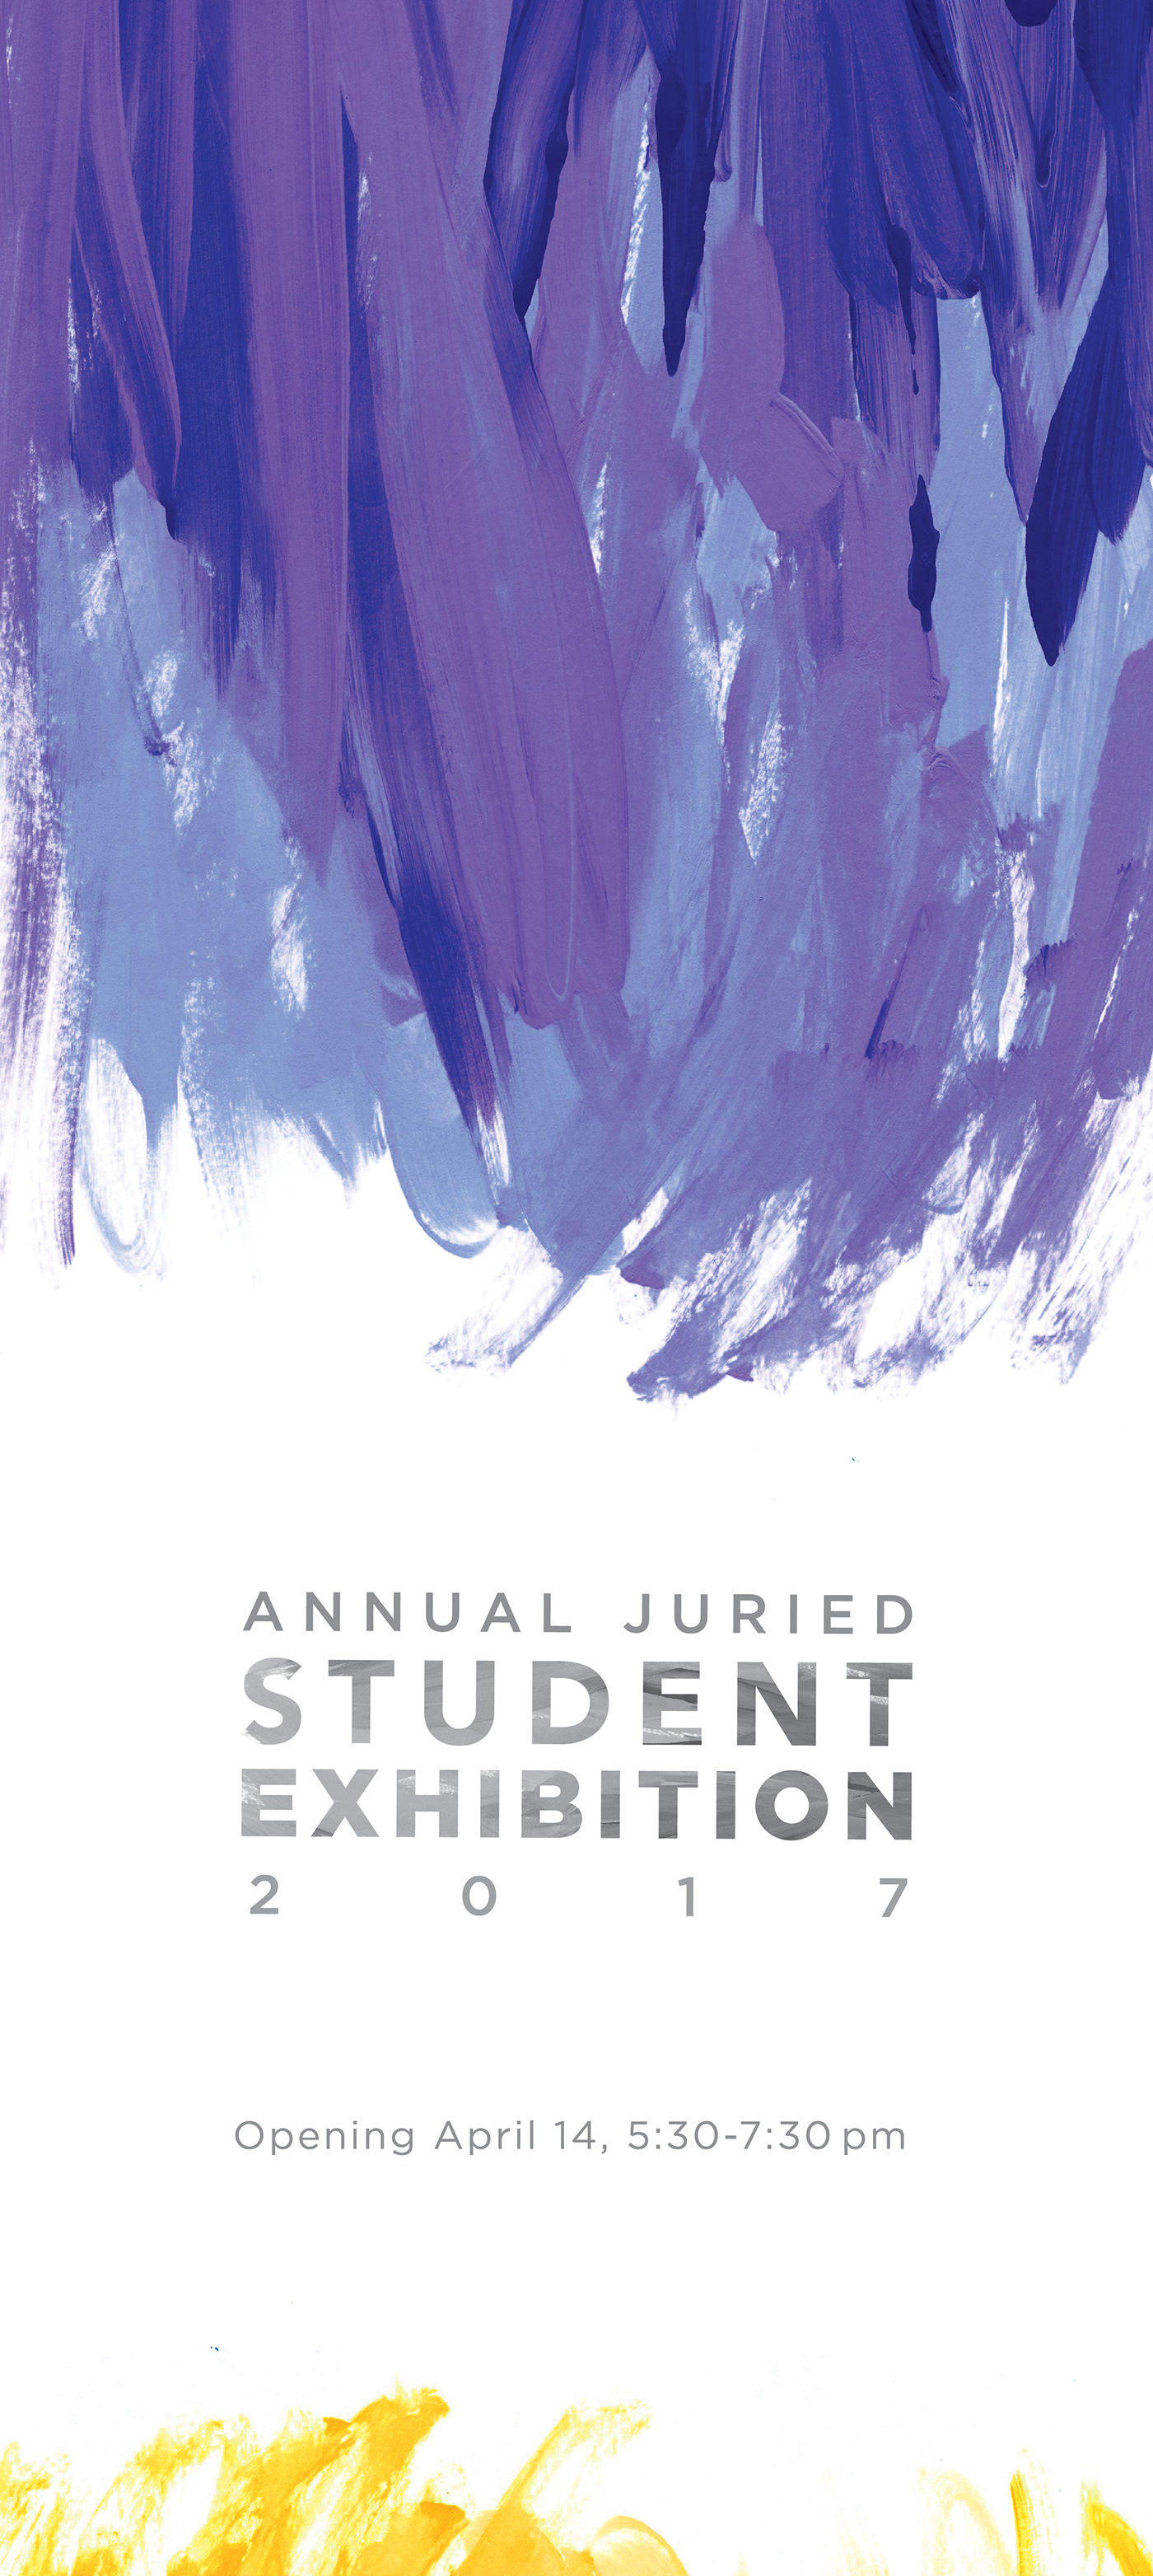 Student Exhibition Poster art show Meramec annual juried student Exhibition 